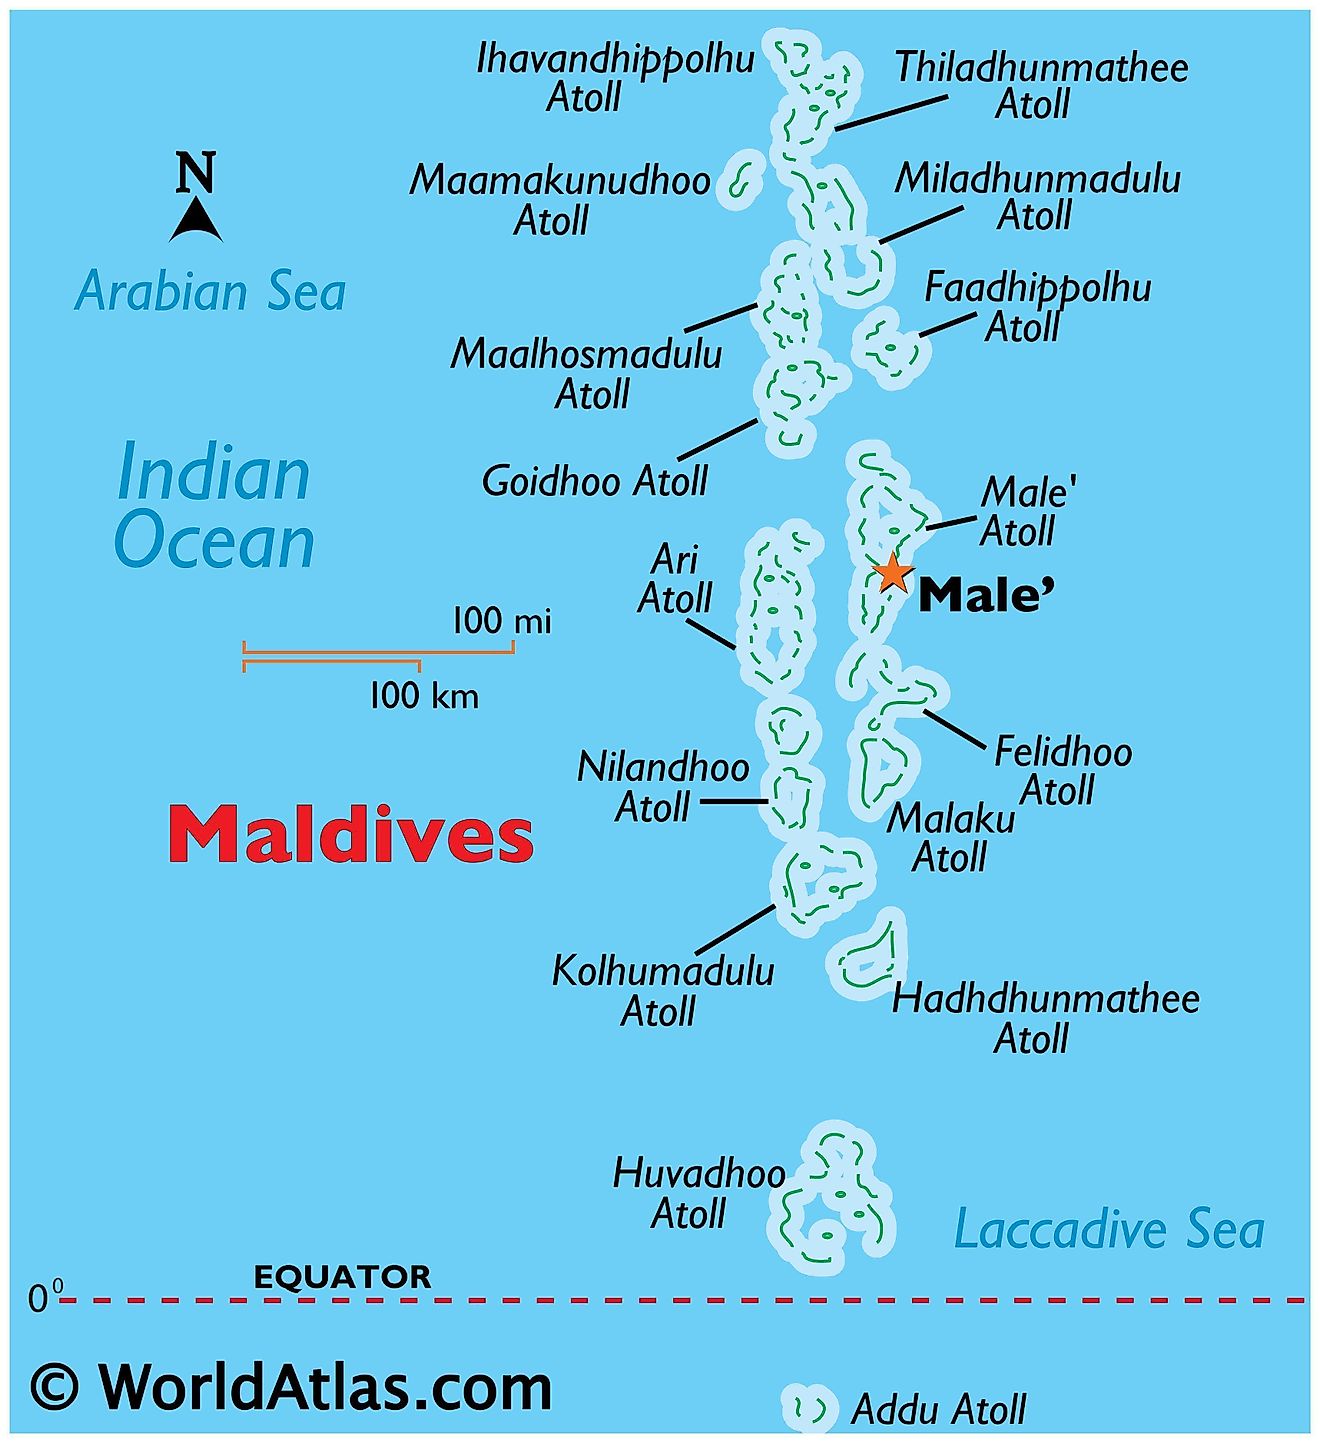 Administrative Divisions and Atolls